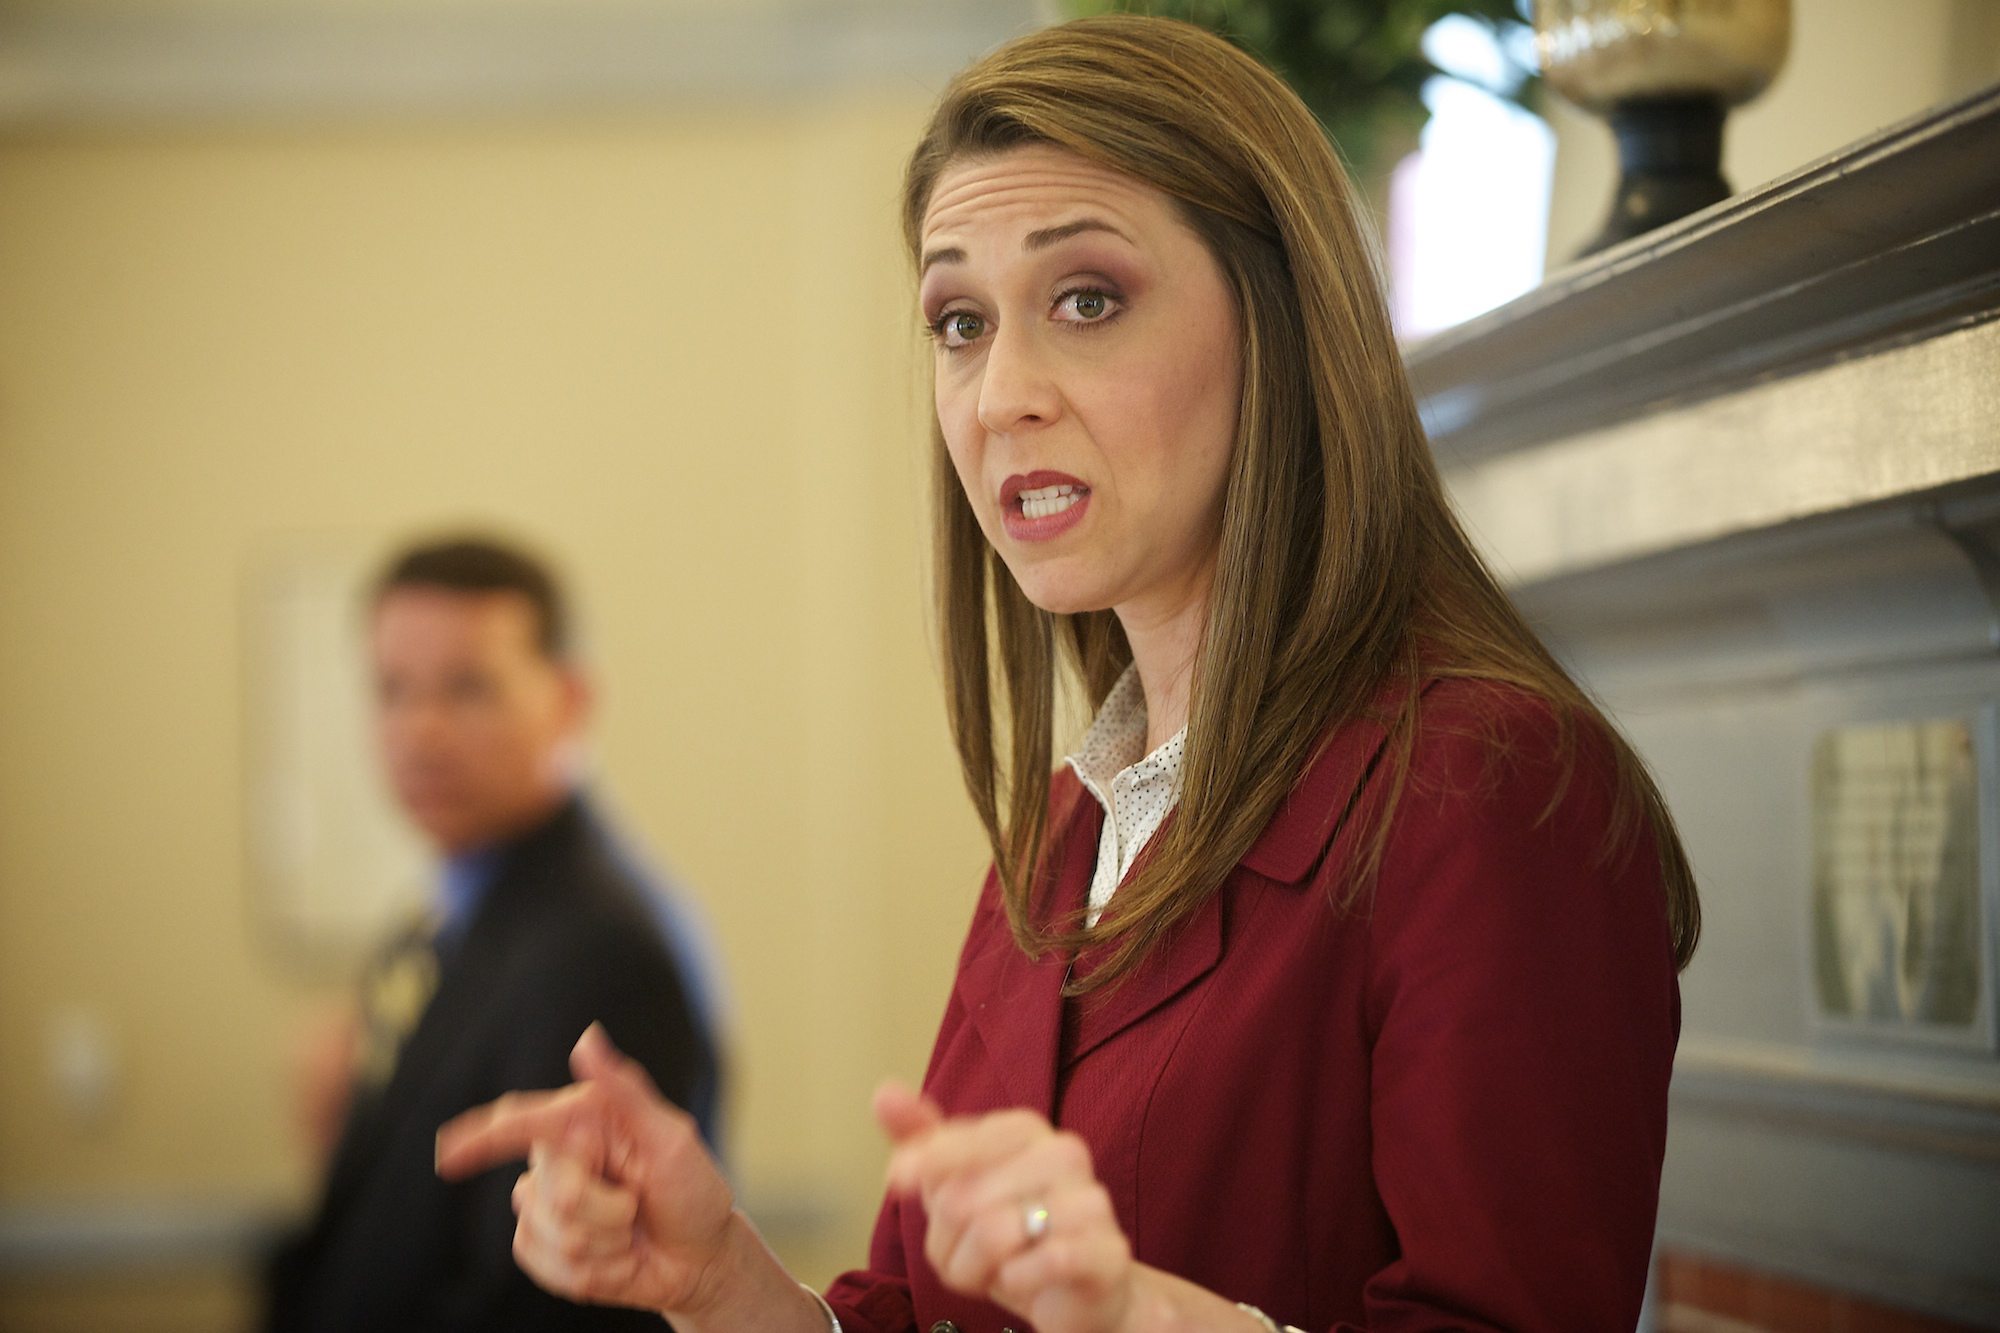 U.S. Rep. Jaime Herrera Beutler, R-Camas, will participate in a live chat at 9:30 a.m.